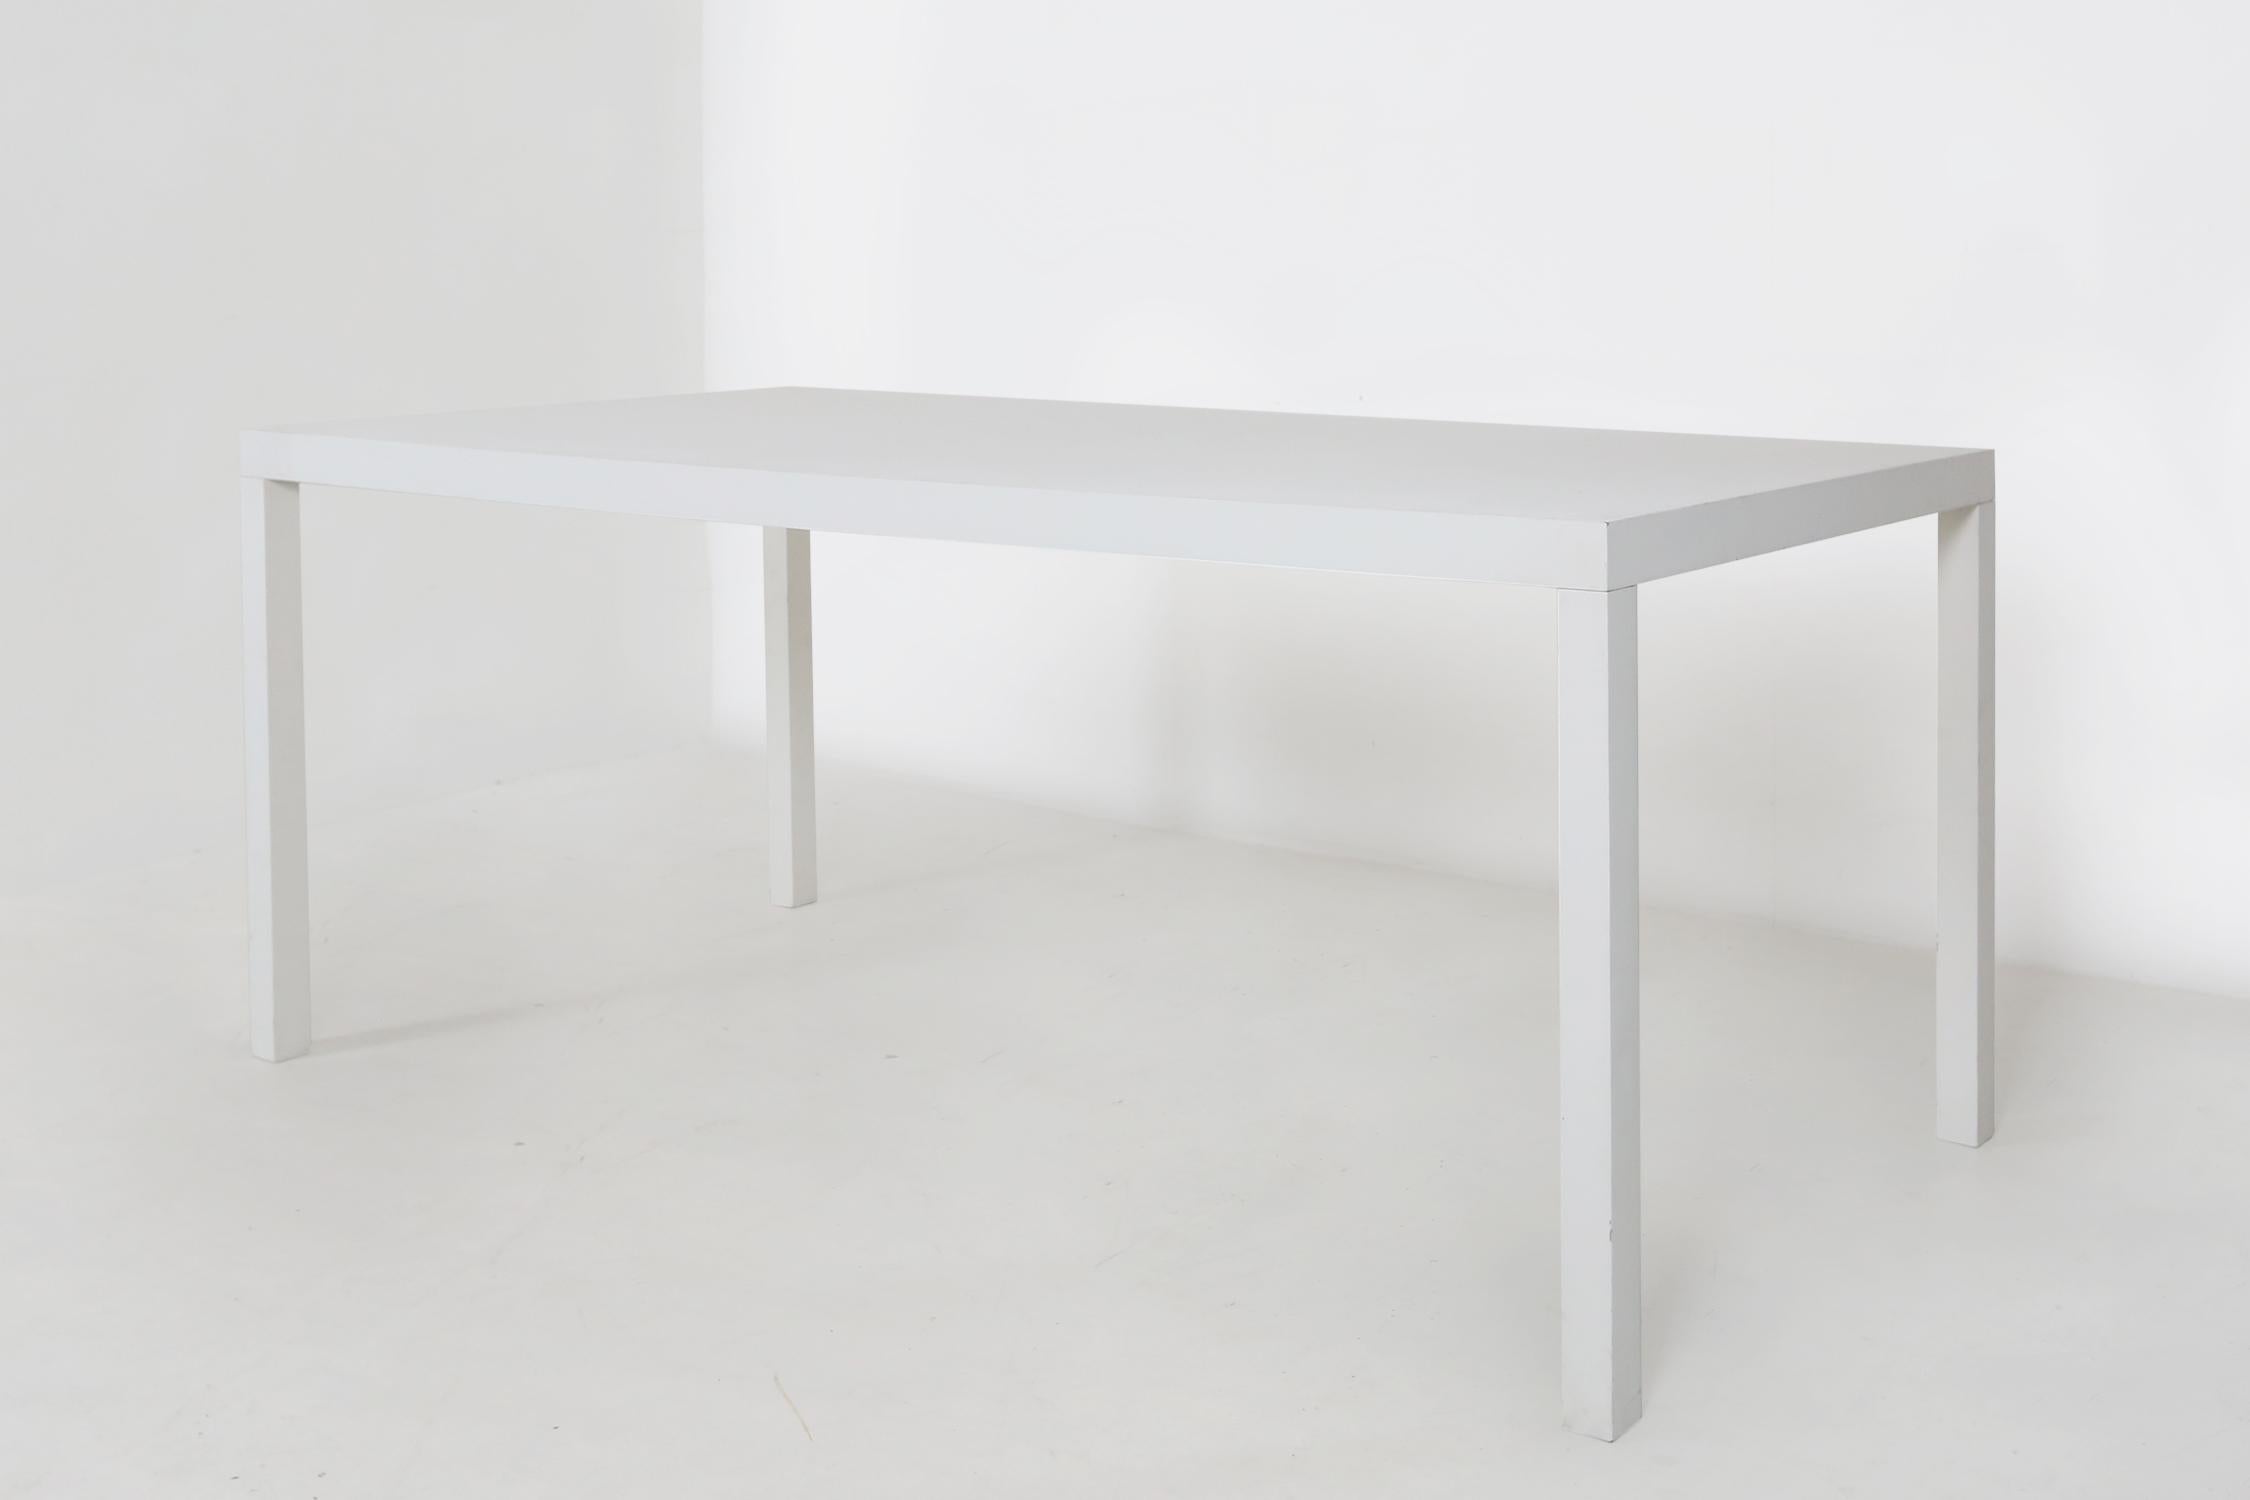 White T88W table by designer Maarten Van Severen.
This table is a Top Mouton edition.

The chair is not for sale, it is just for scale.